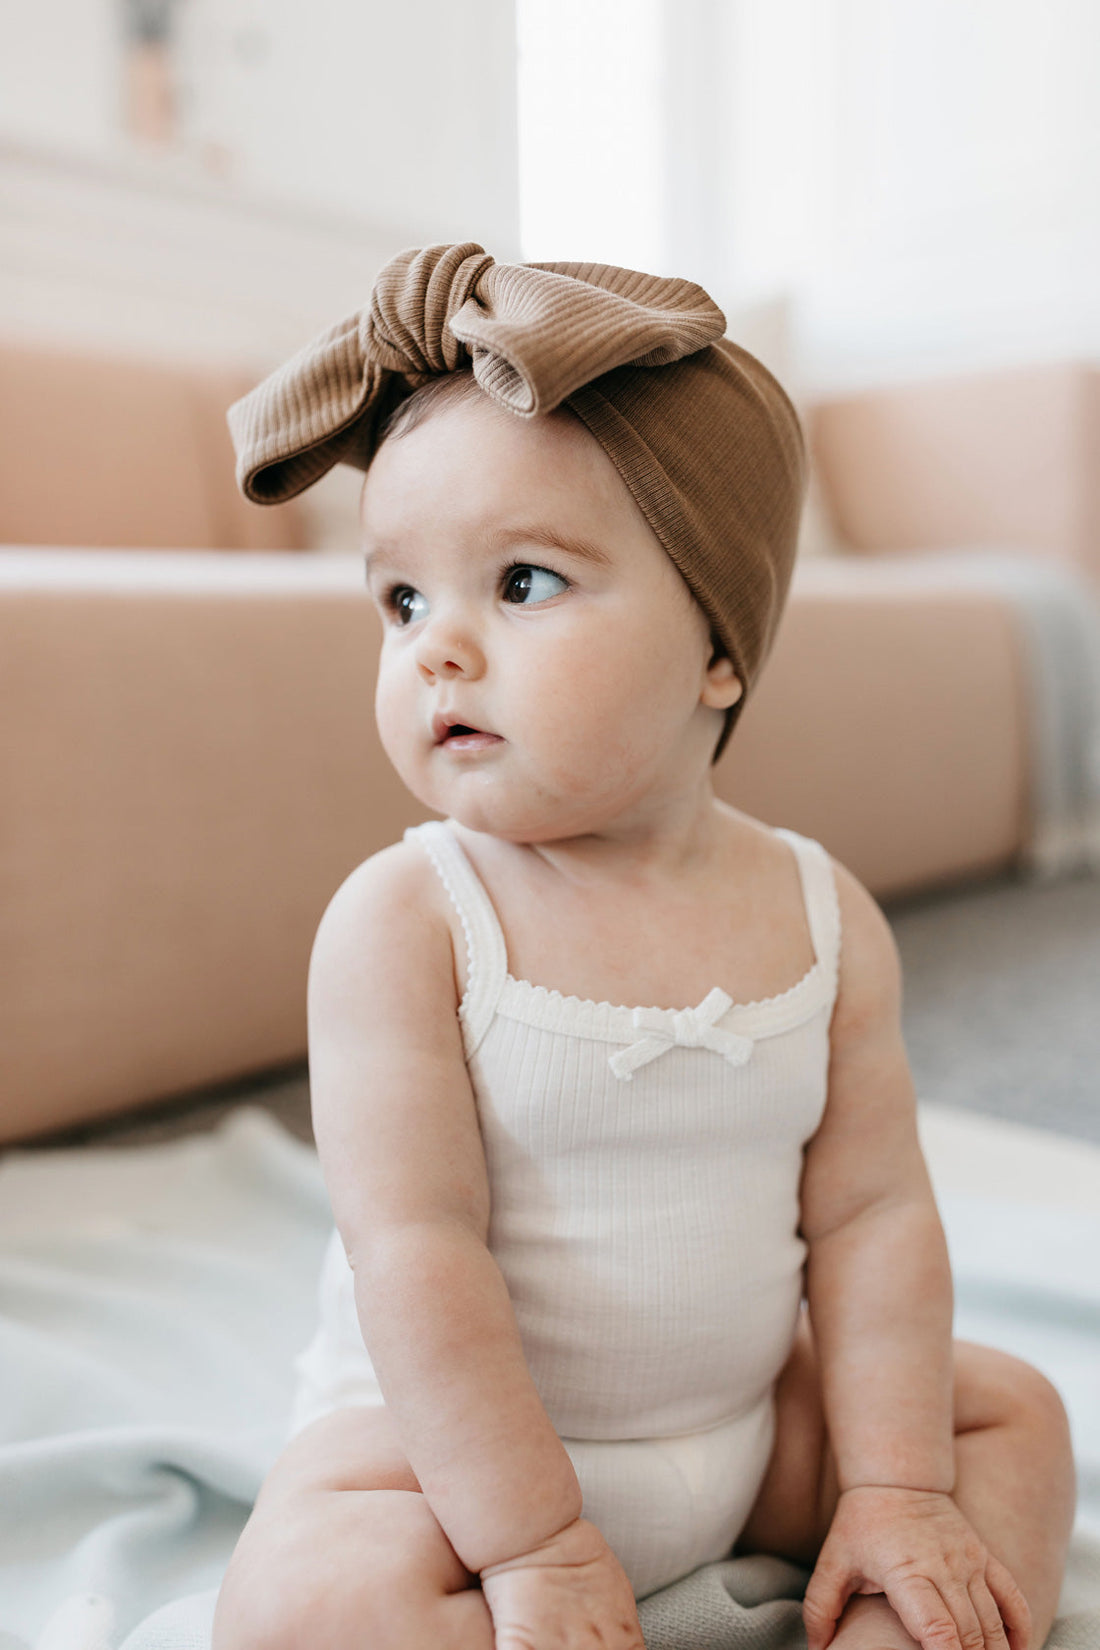 Jamie Kay - Cuteness overload in our Esme floral headband